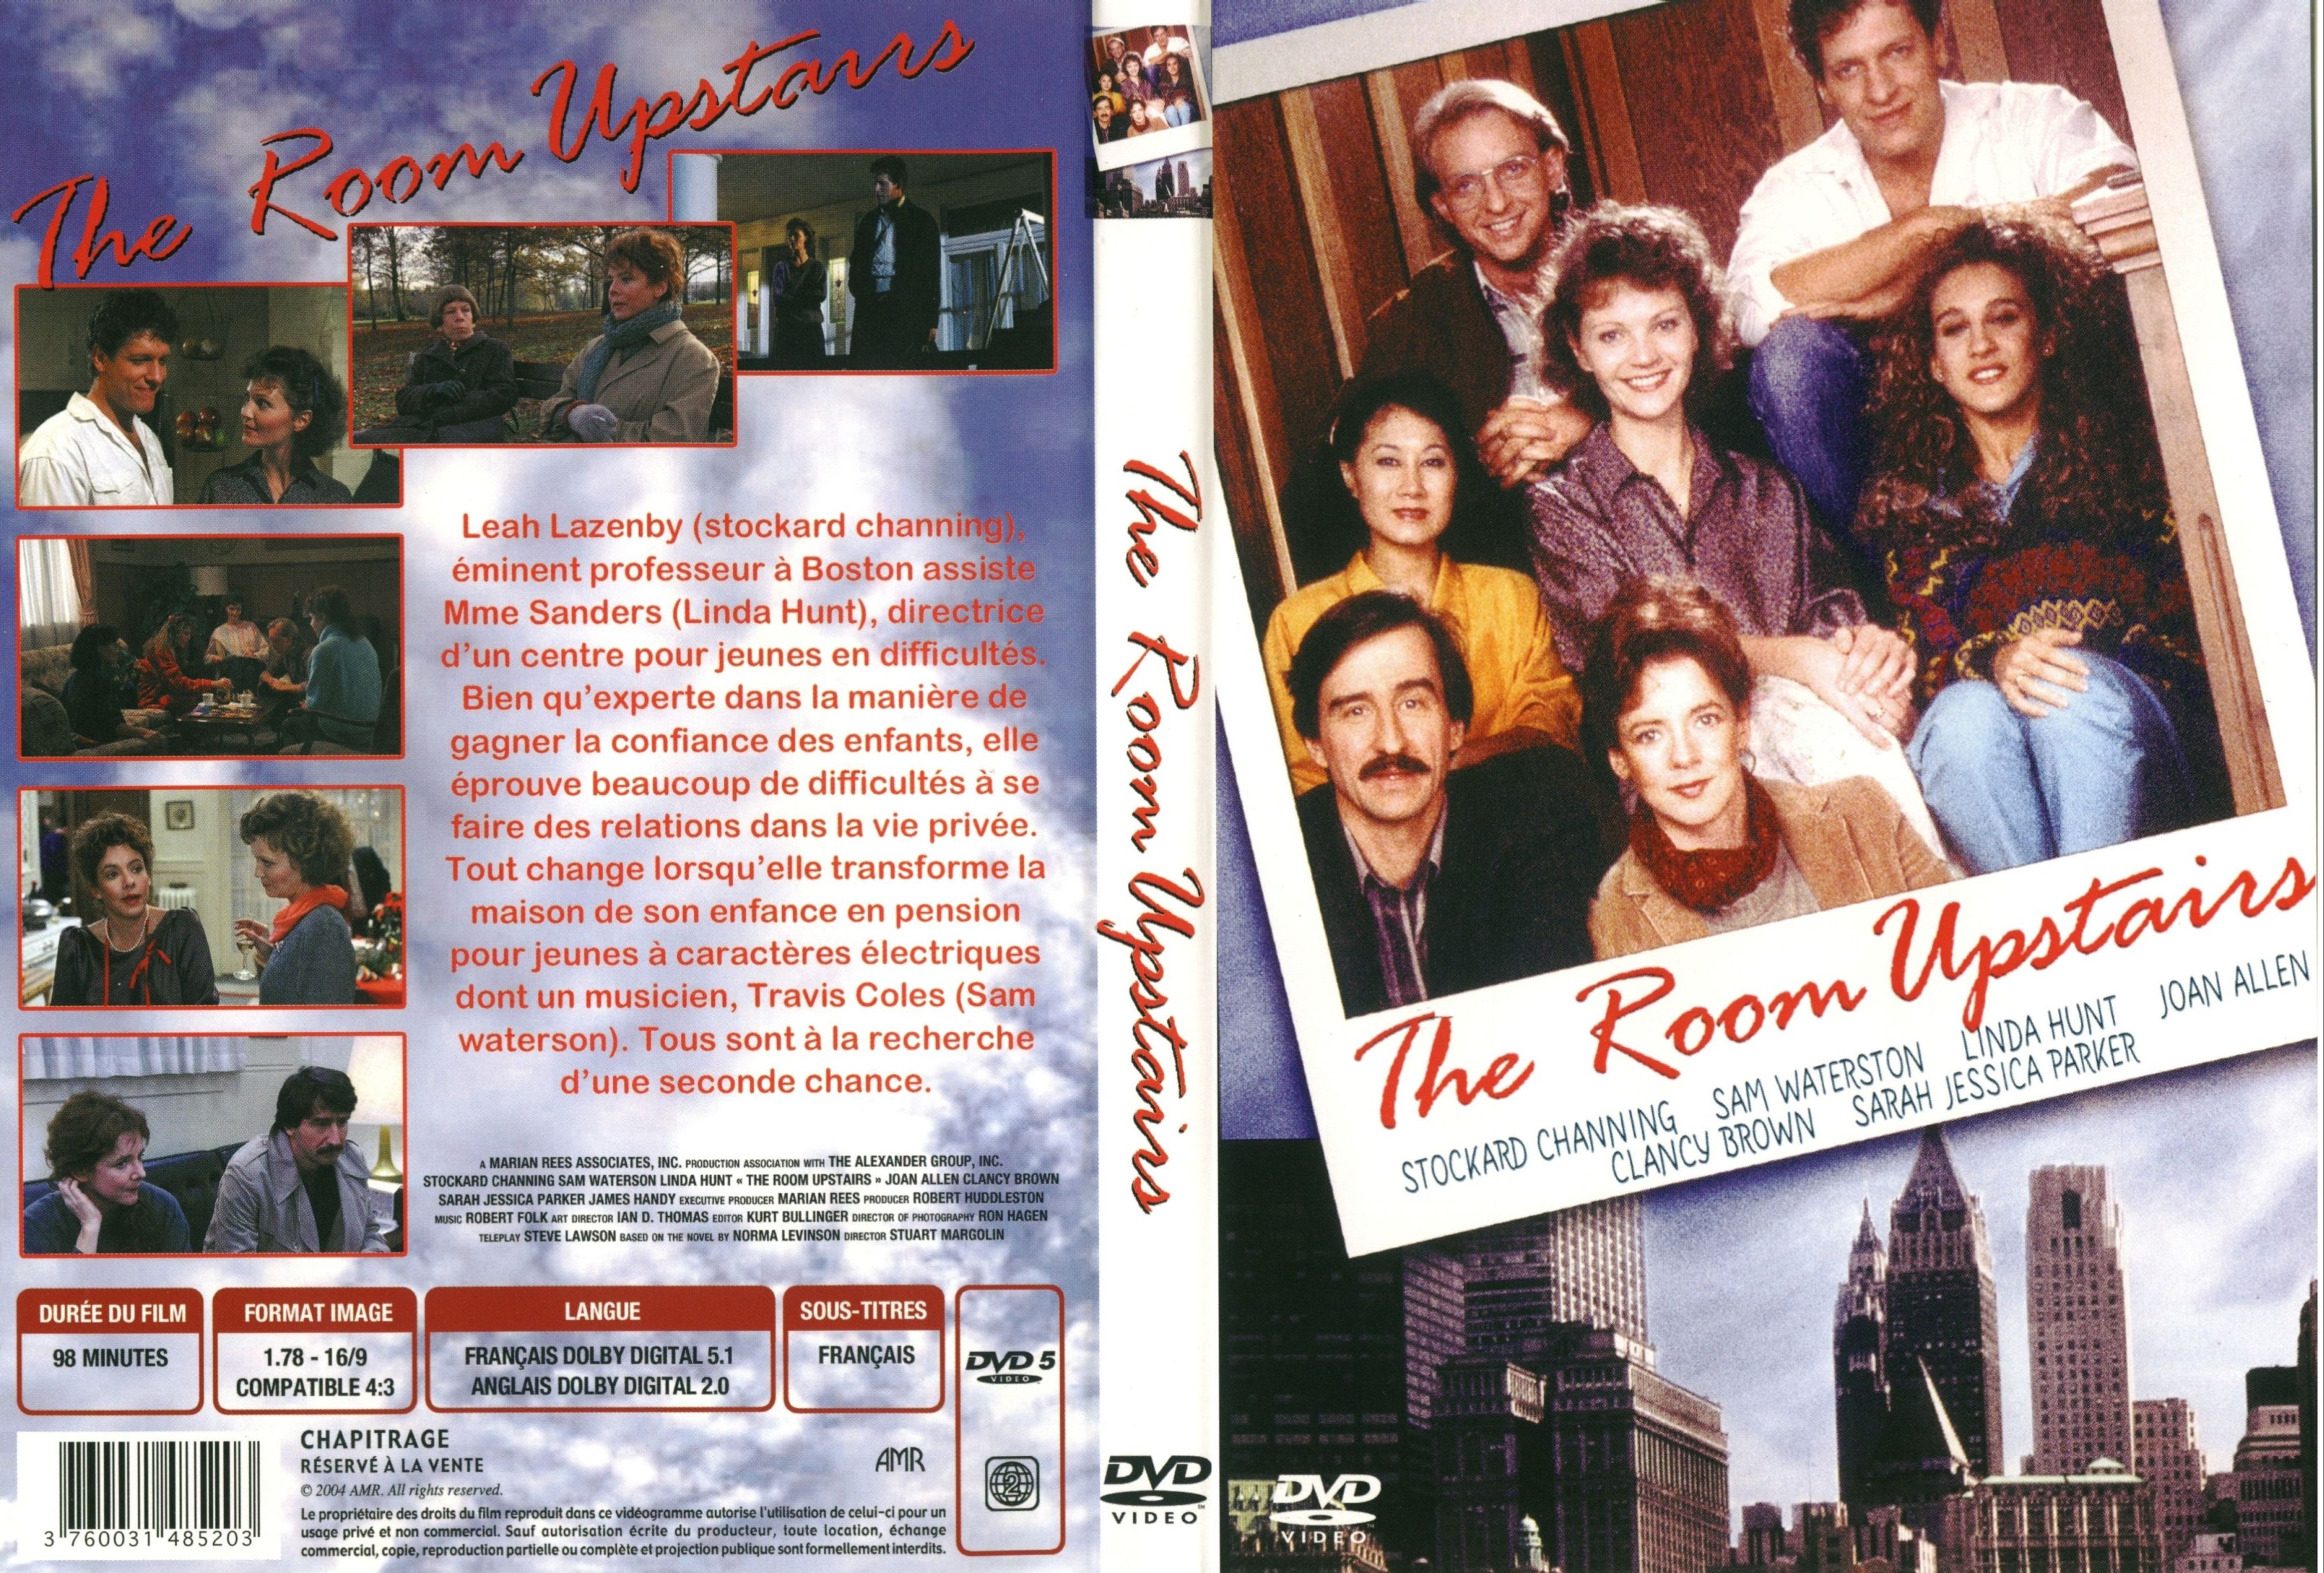 Jaquette DVD The room upstairs v2